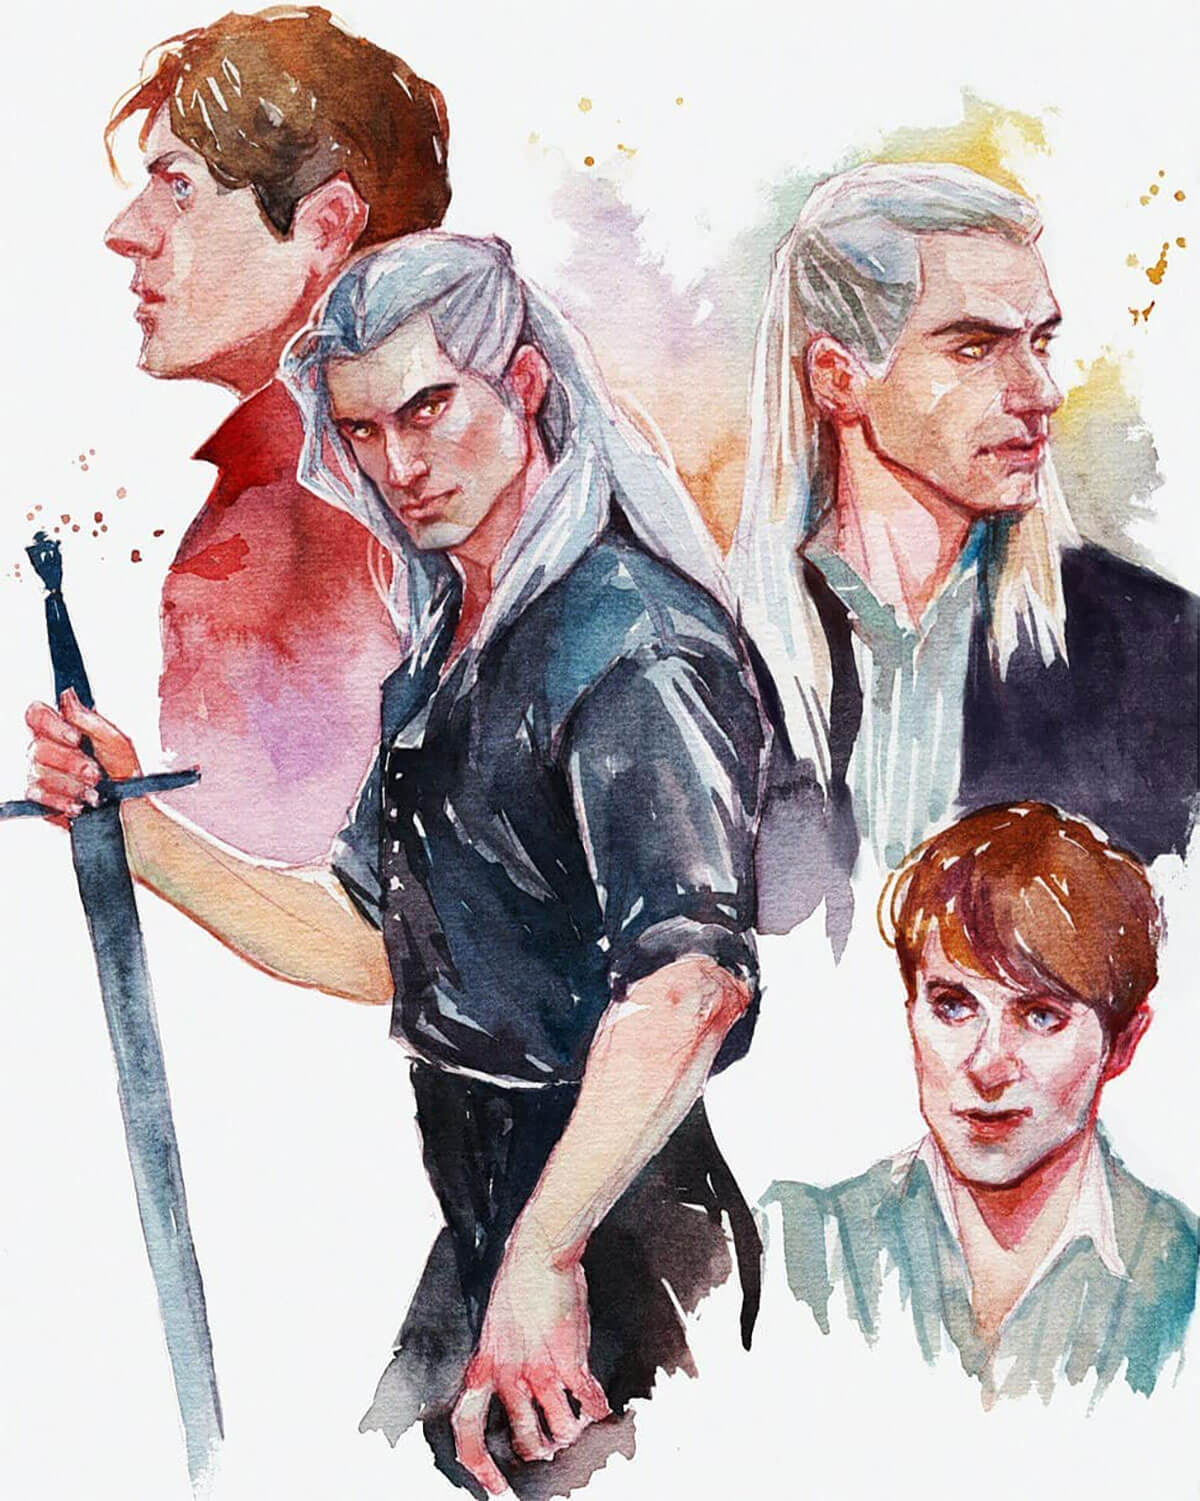 The Witcher fanart by Jan